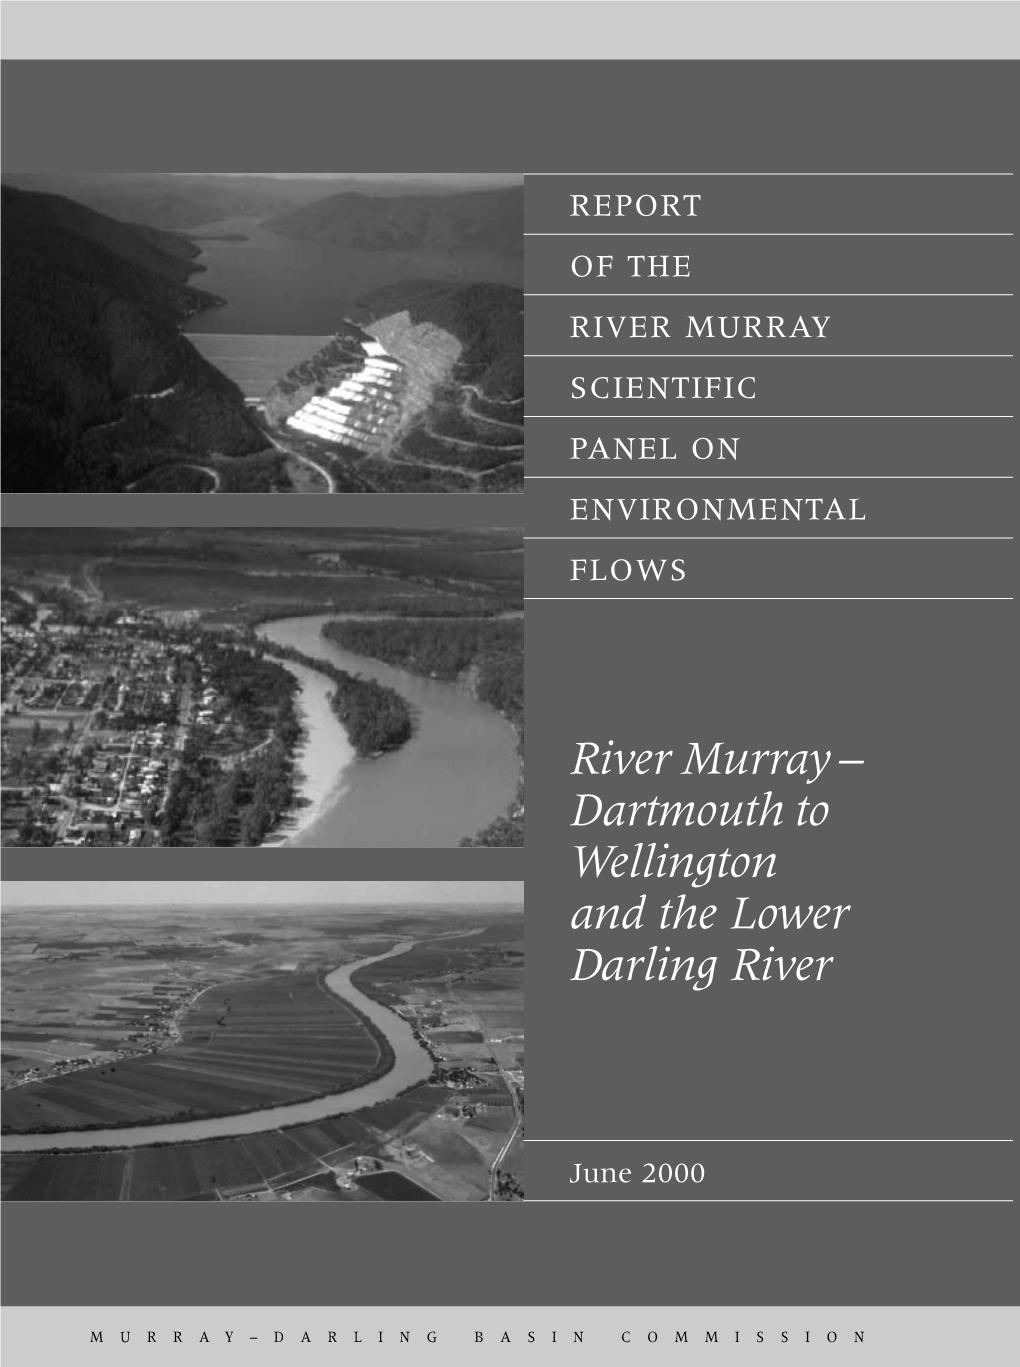 River Murray Scientific Panel on Environmental Flows